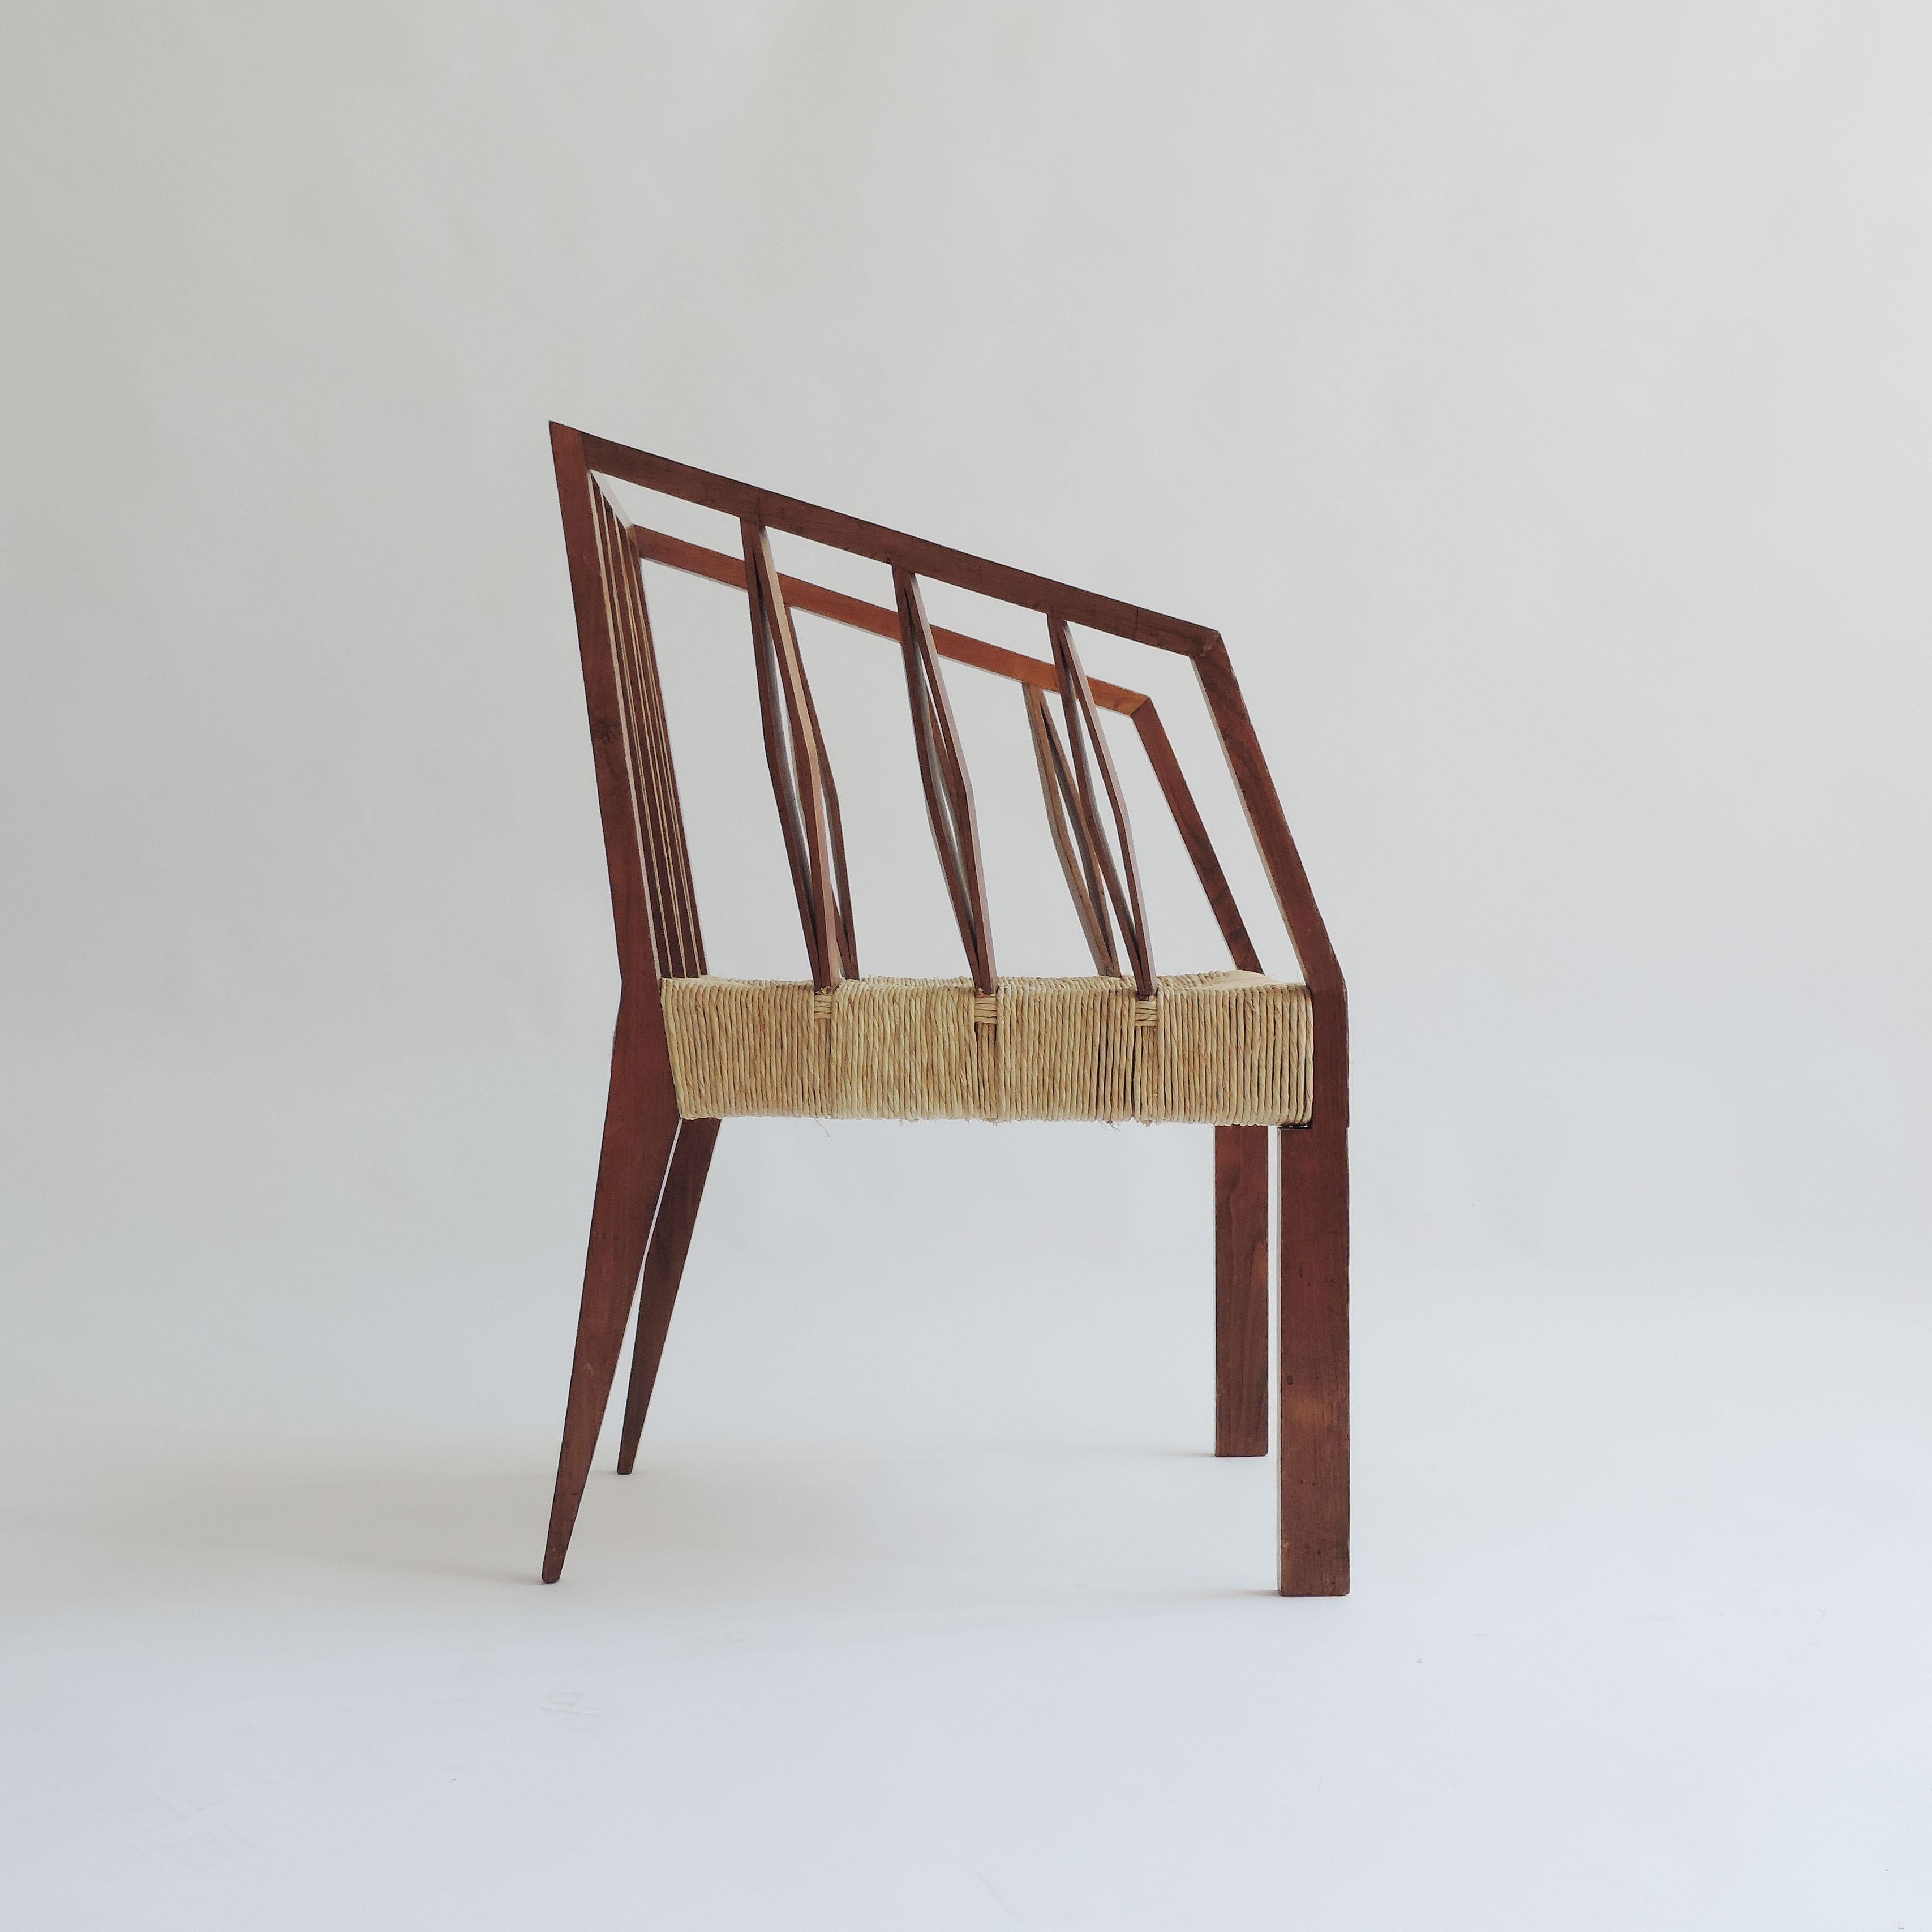 Mario Asnago & Claudio Vender sublime armchair, Italy 1940s
Raffia seat has been professionally redone.